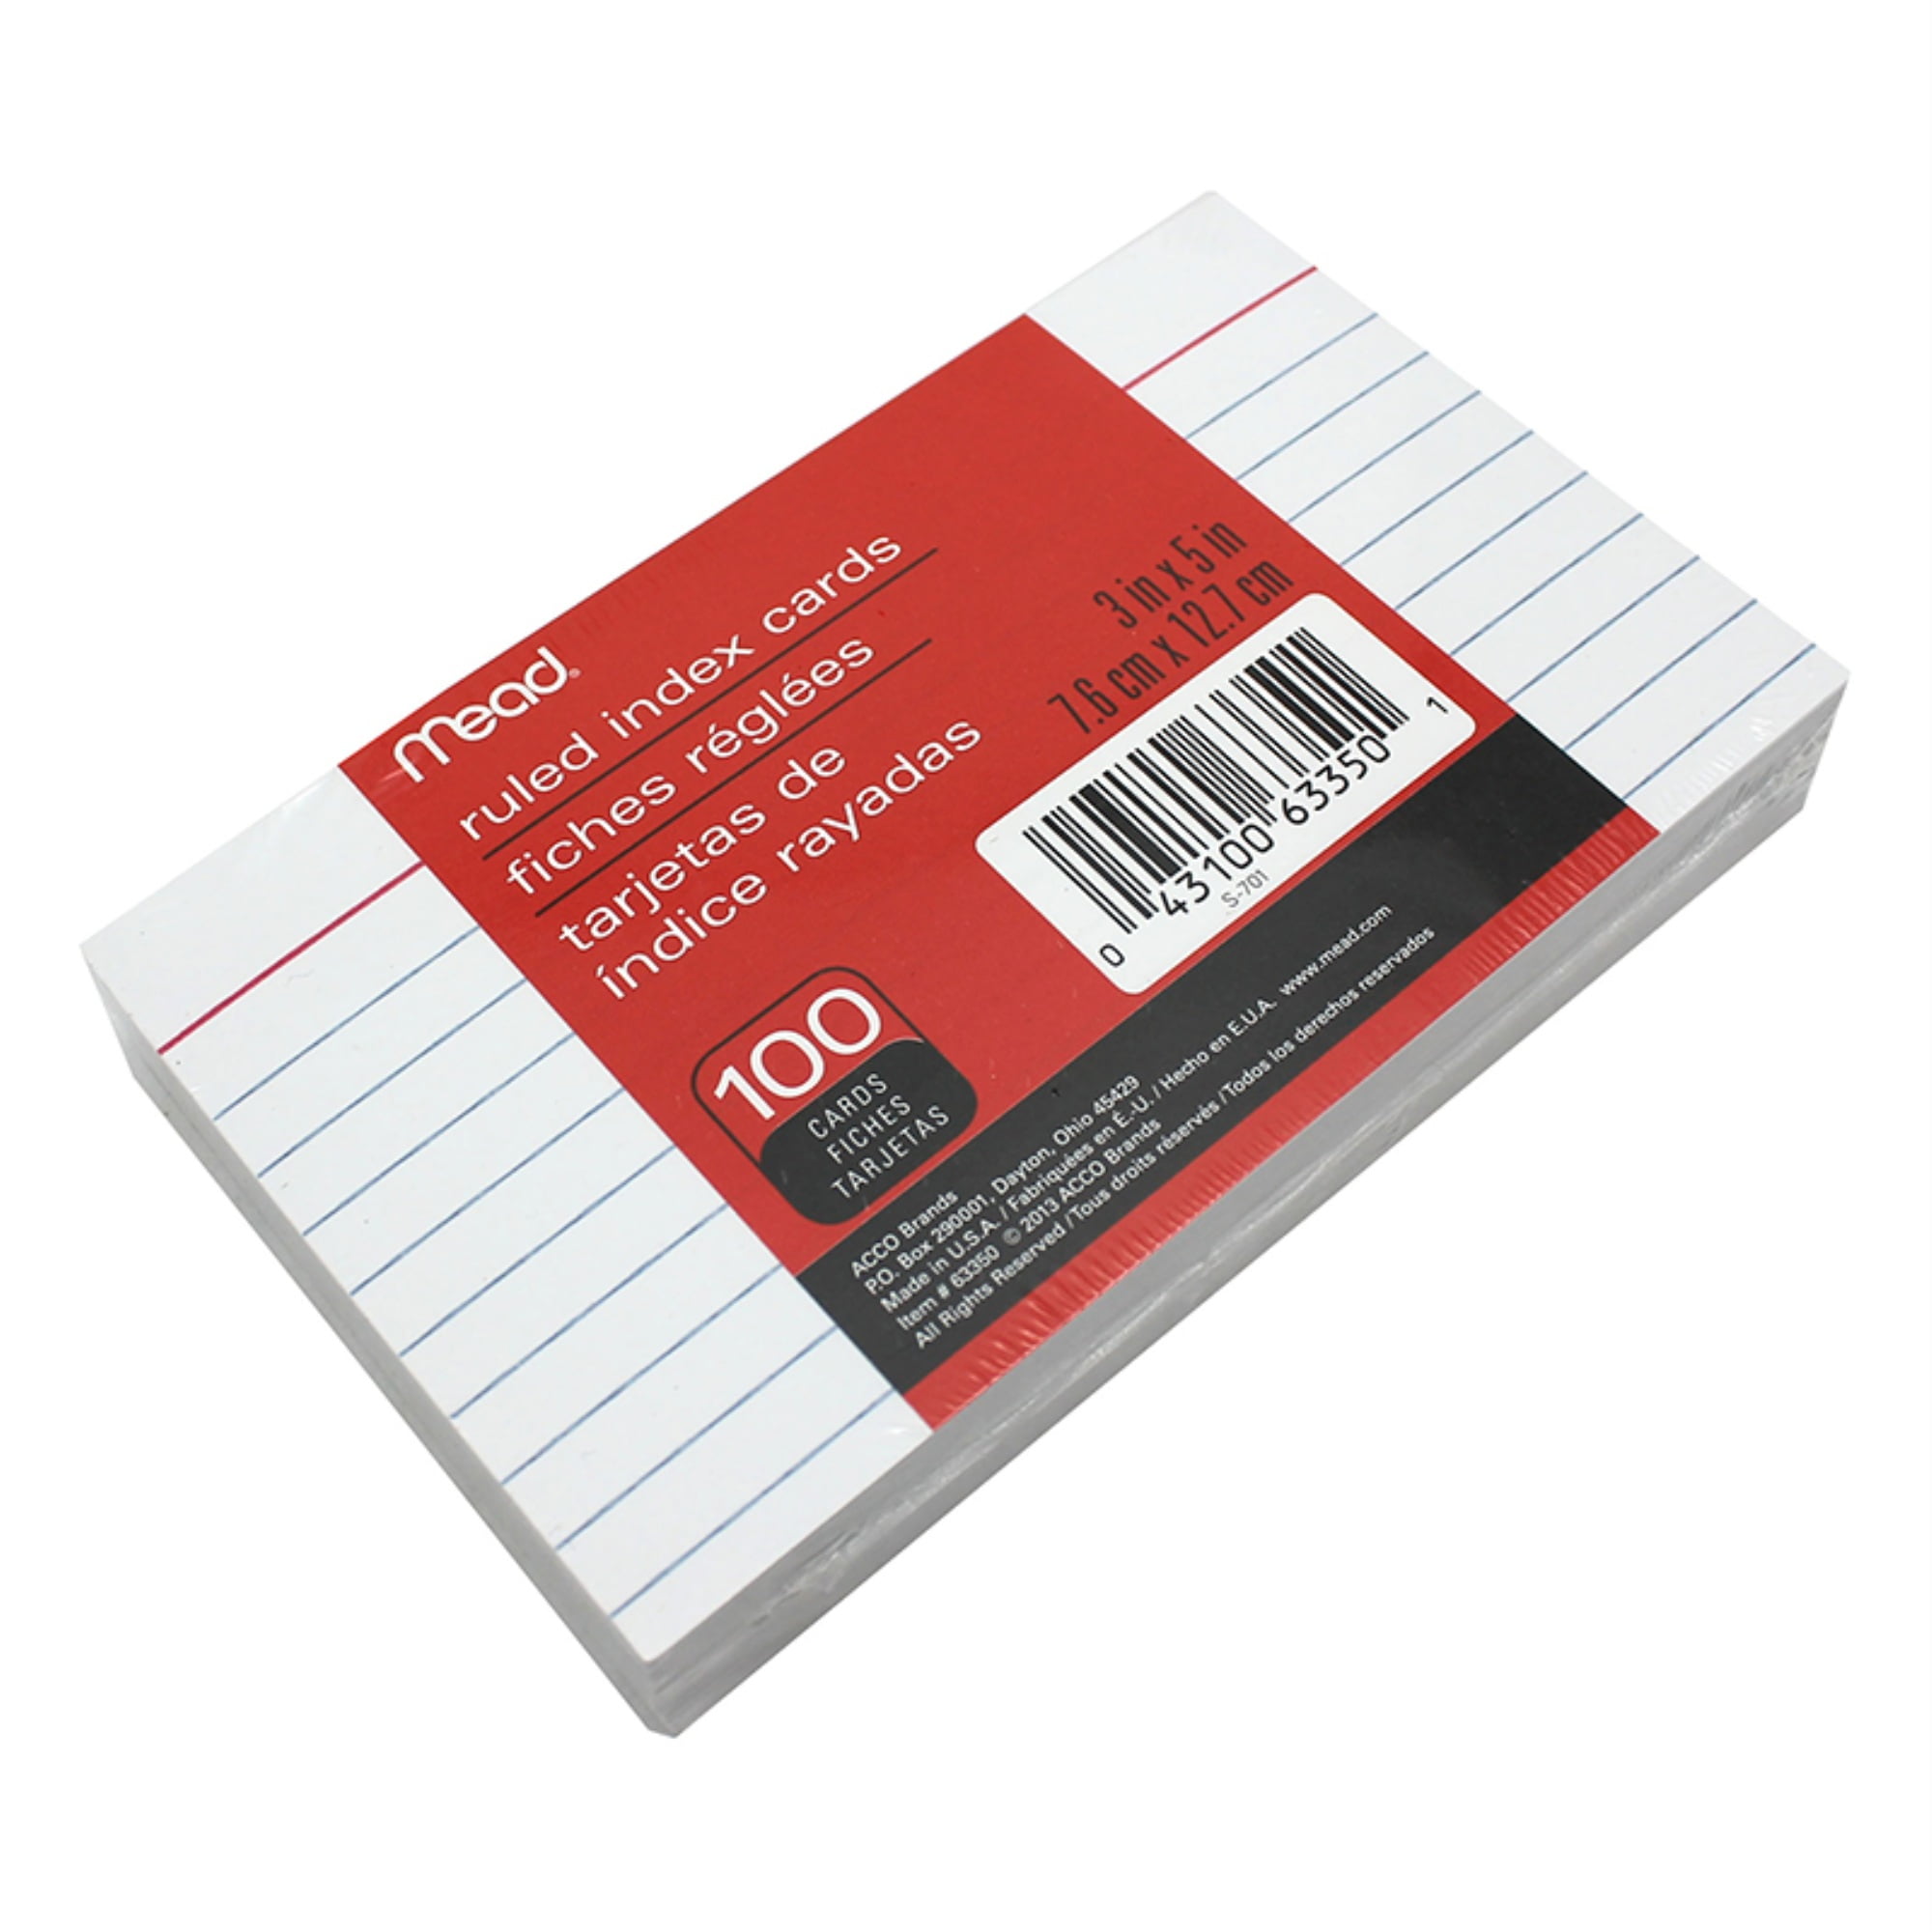 White Oxford "Ruled Index Cards 10 Packs of 100" 3 x 5 